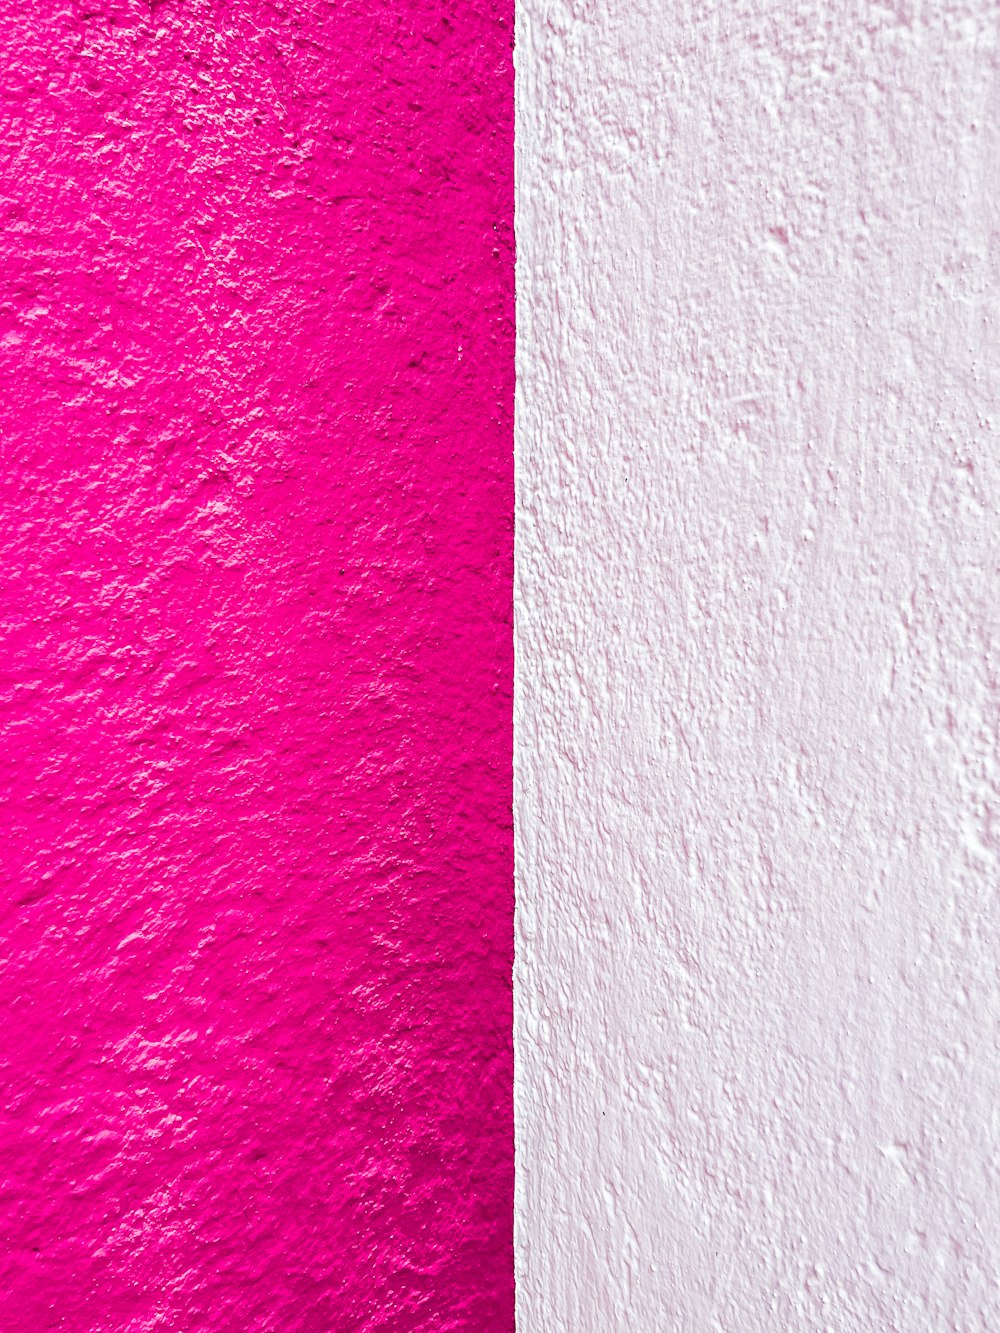 a white and pink wall next to each other